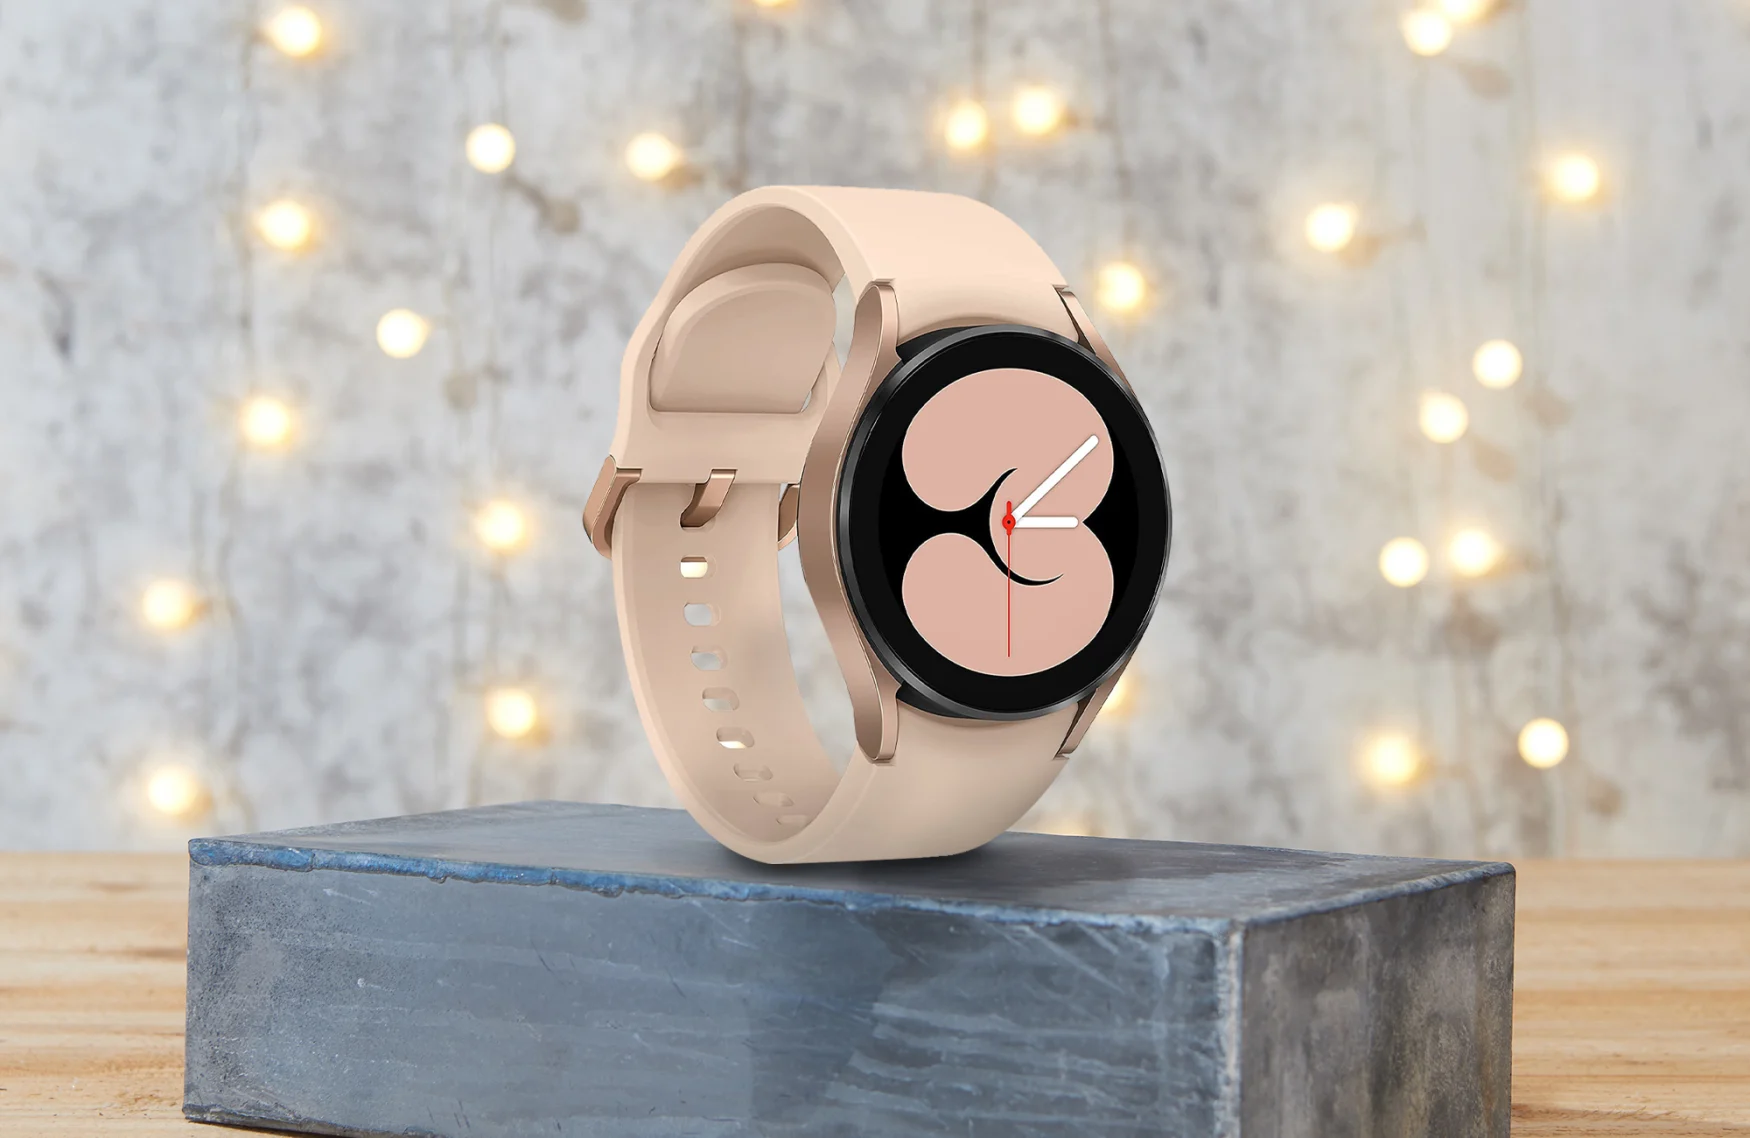 Samsung Watch 4 for the Engadget 2021 Holiday Gift Guide.
